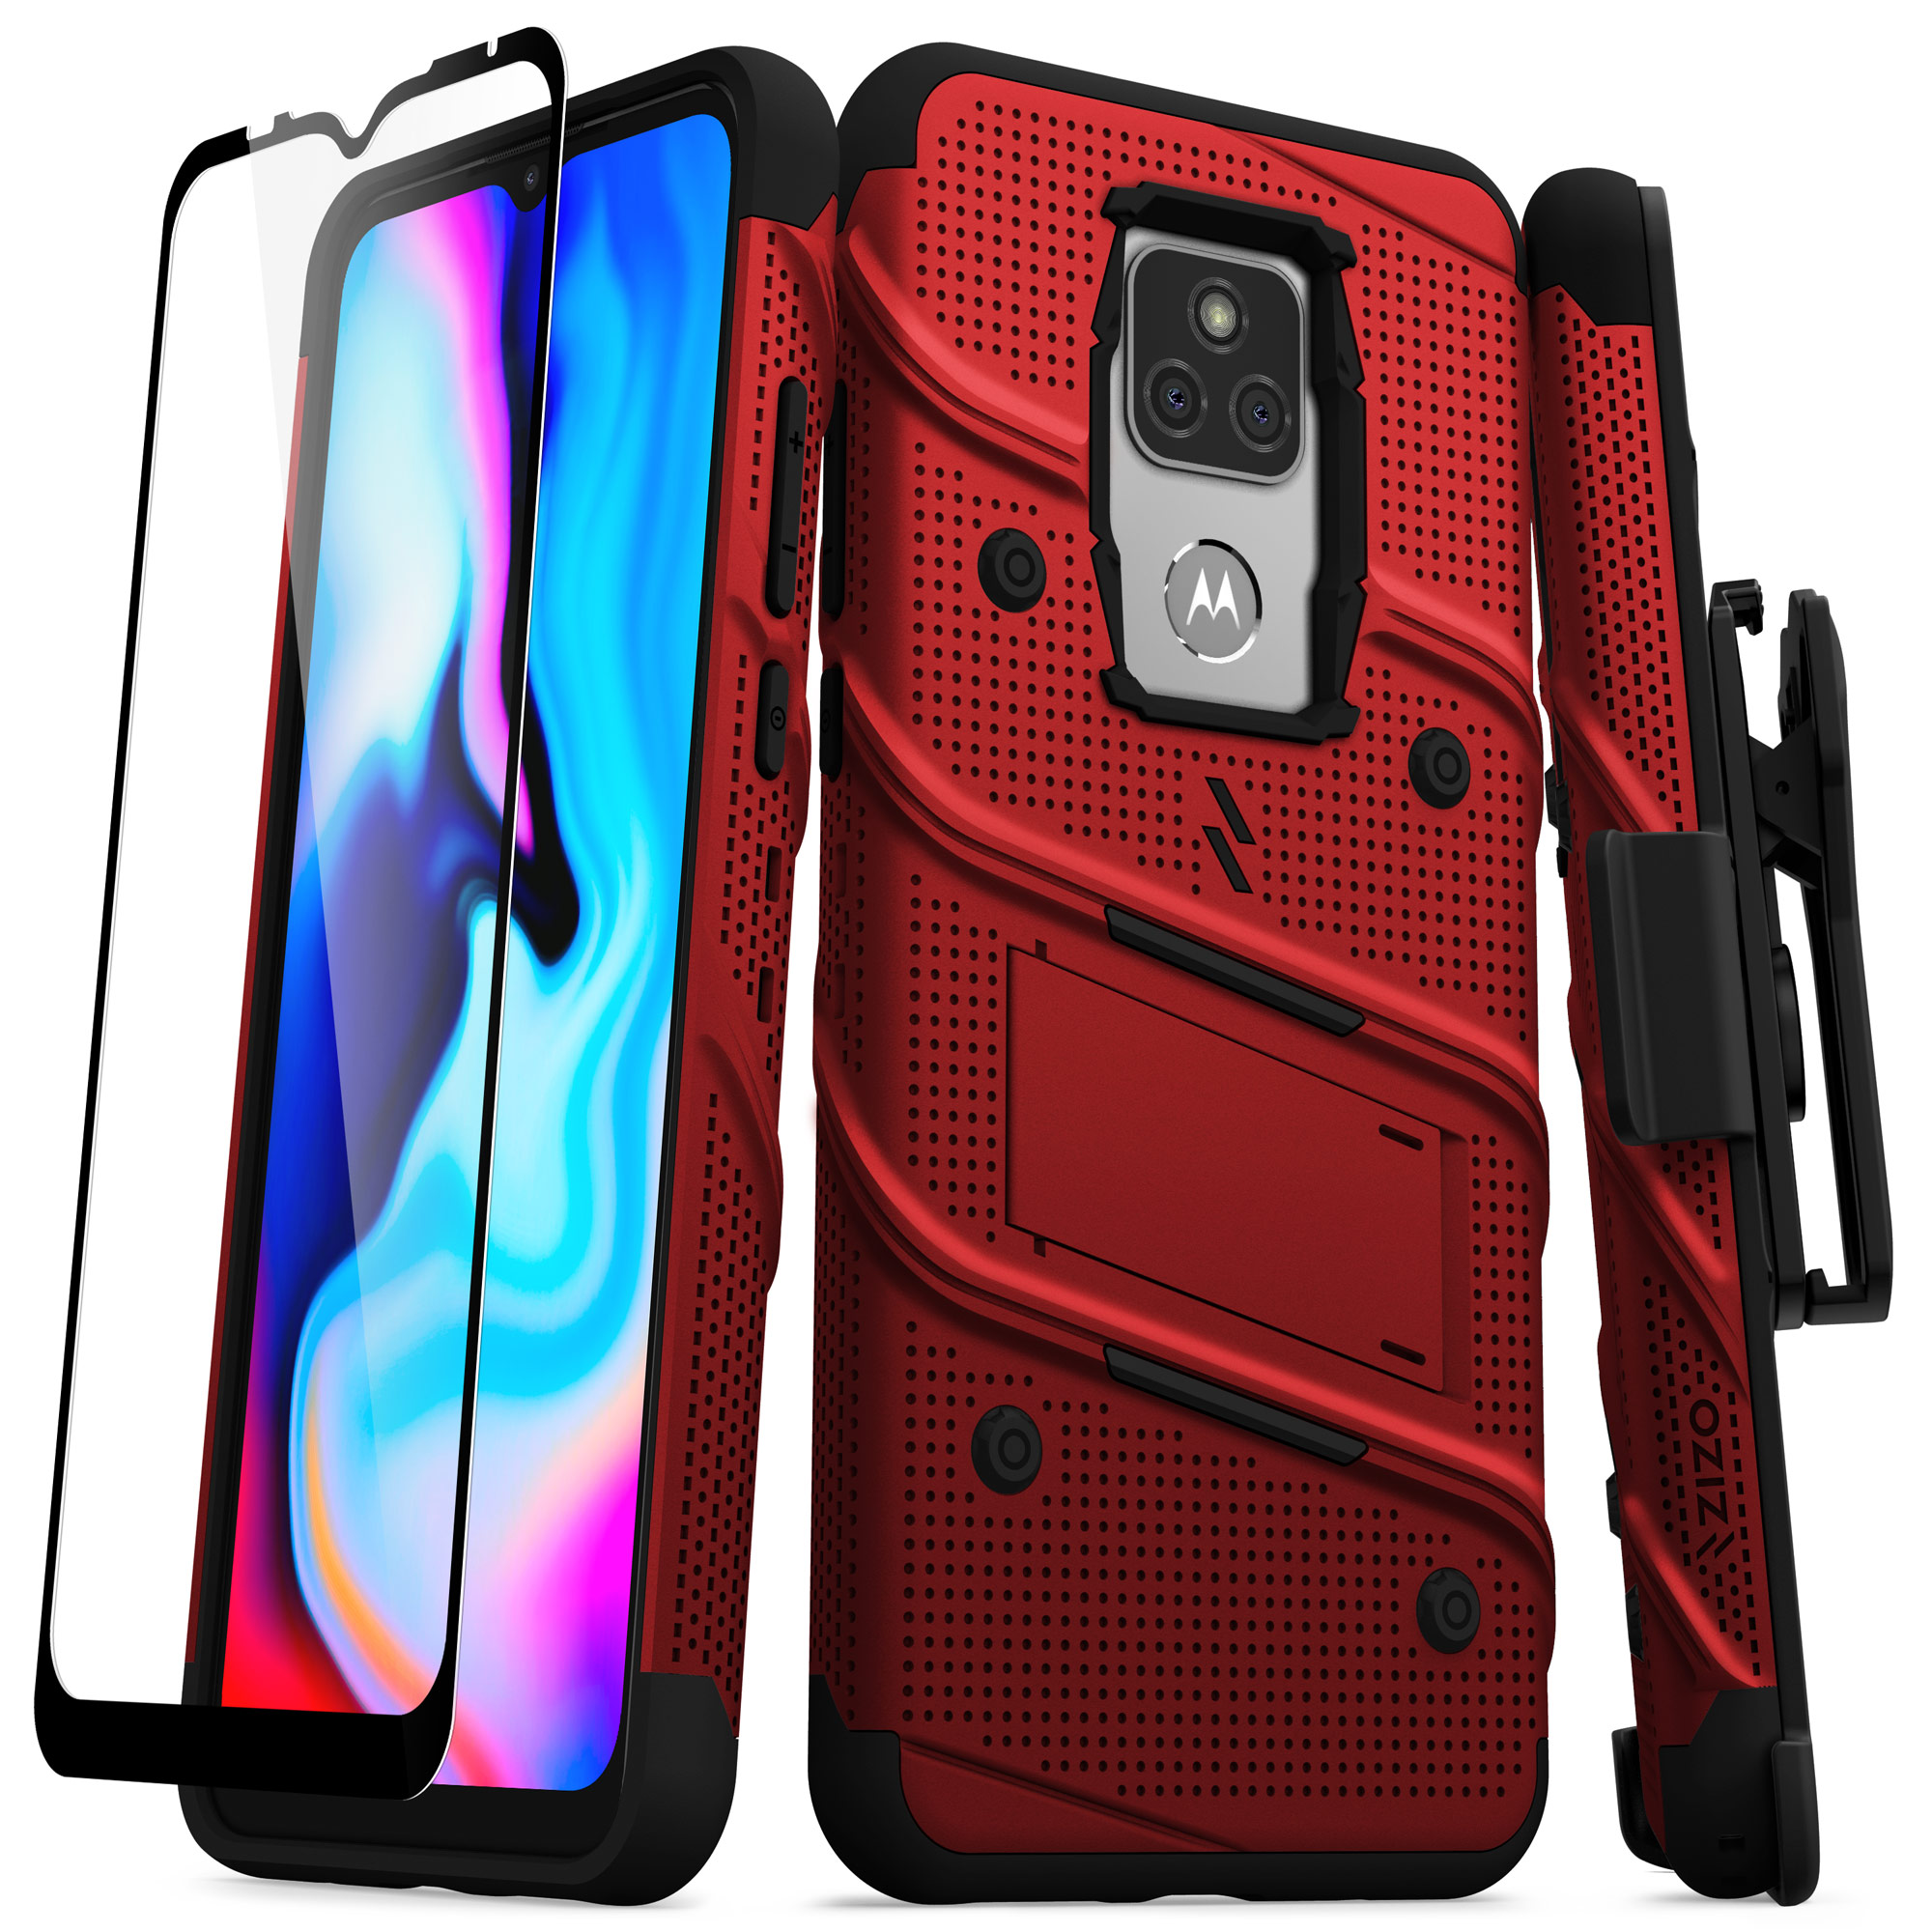 Motorola Moto G Play Case, ZIZO BOLT Case with Tempered Glass Red & Black :: CellPhoneCases.com